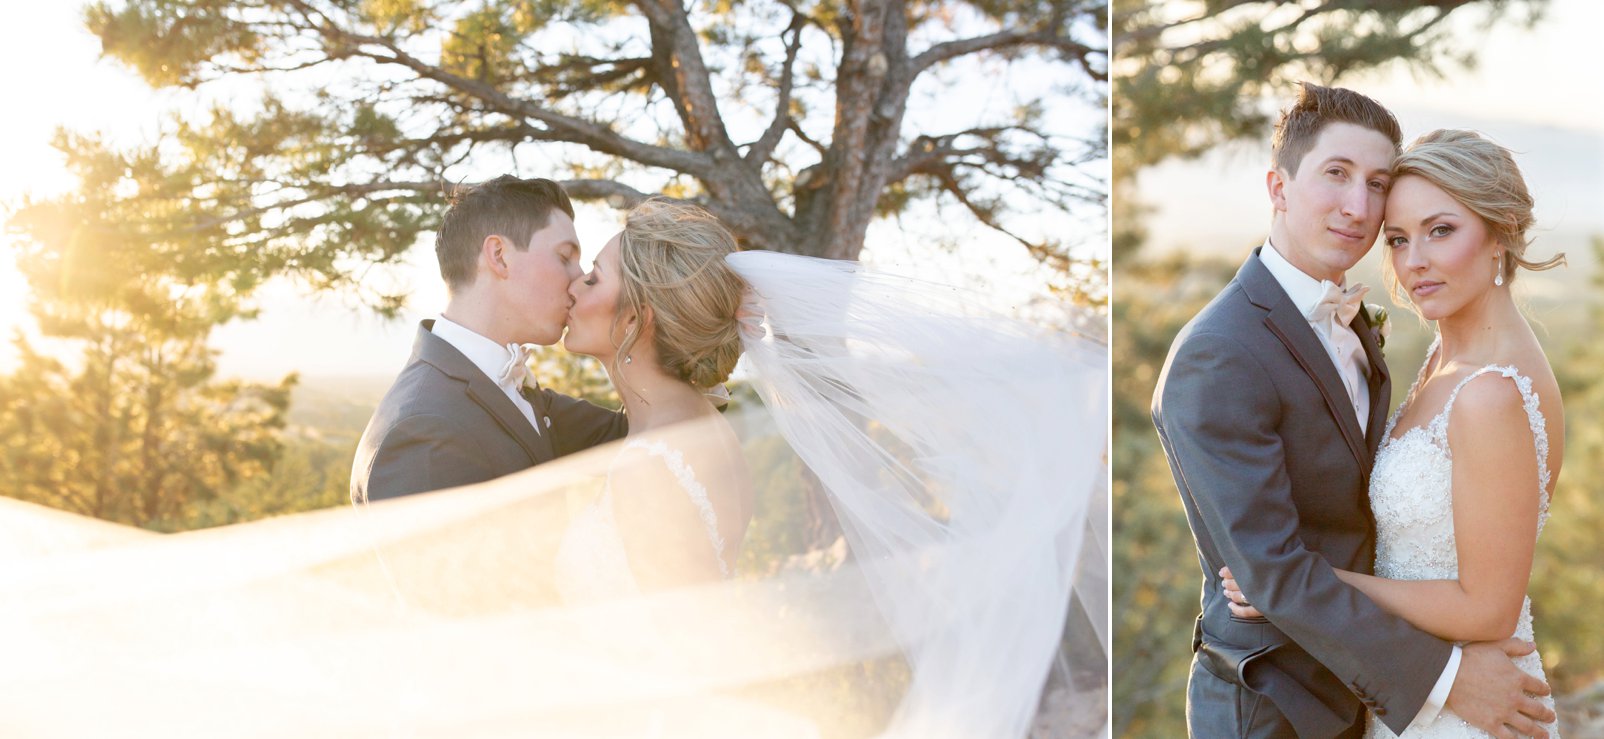 bride and groom photos during fall wedding at sanctuary golf course